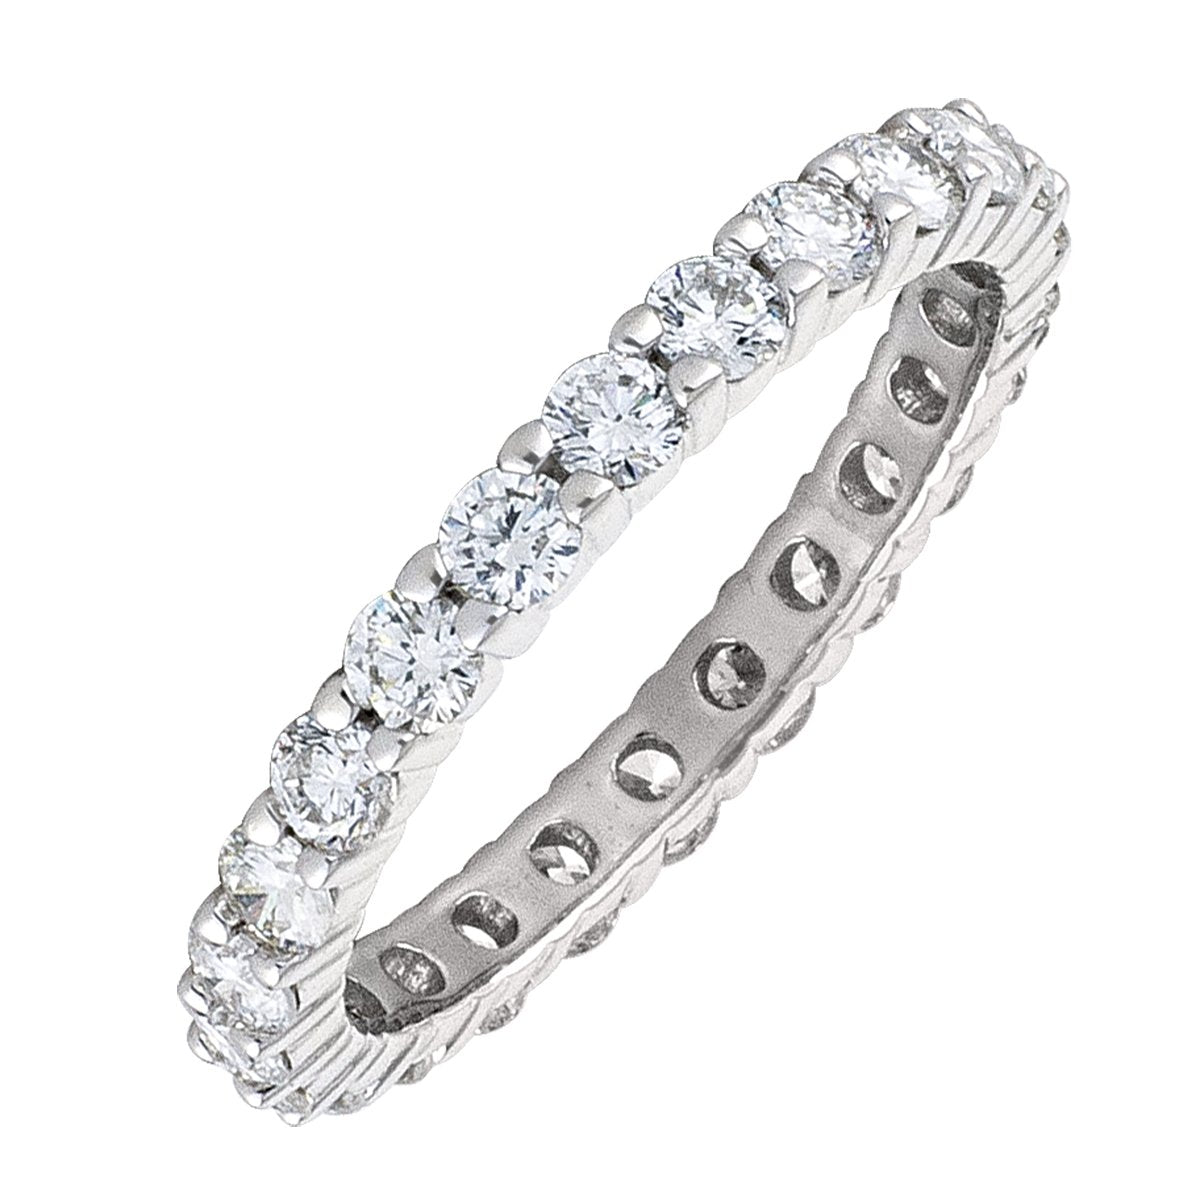 WHITE GOLD DIAMOND SHARED CLAW FULL ETERNITY BAND  (AVAILABE IN VARIOUS STONE AND RING SIZE).